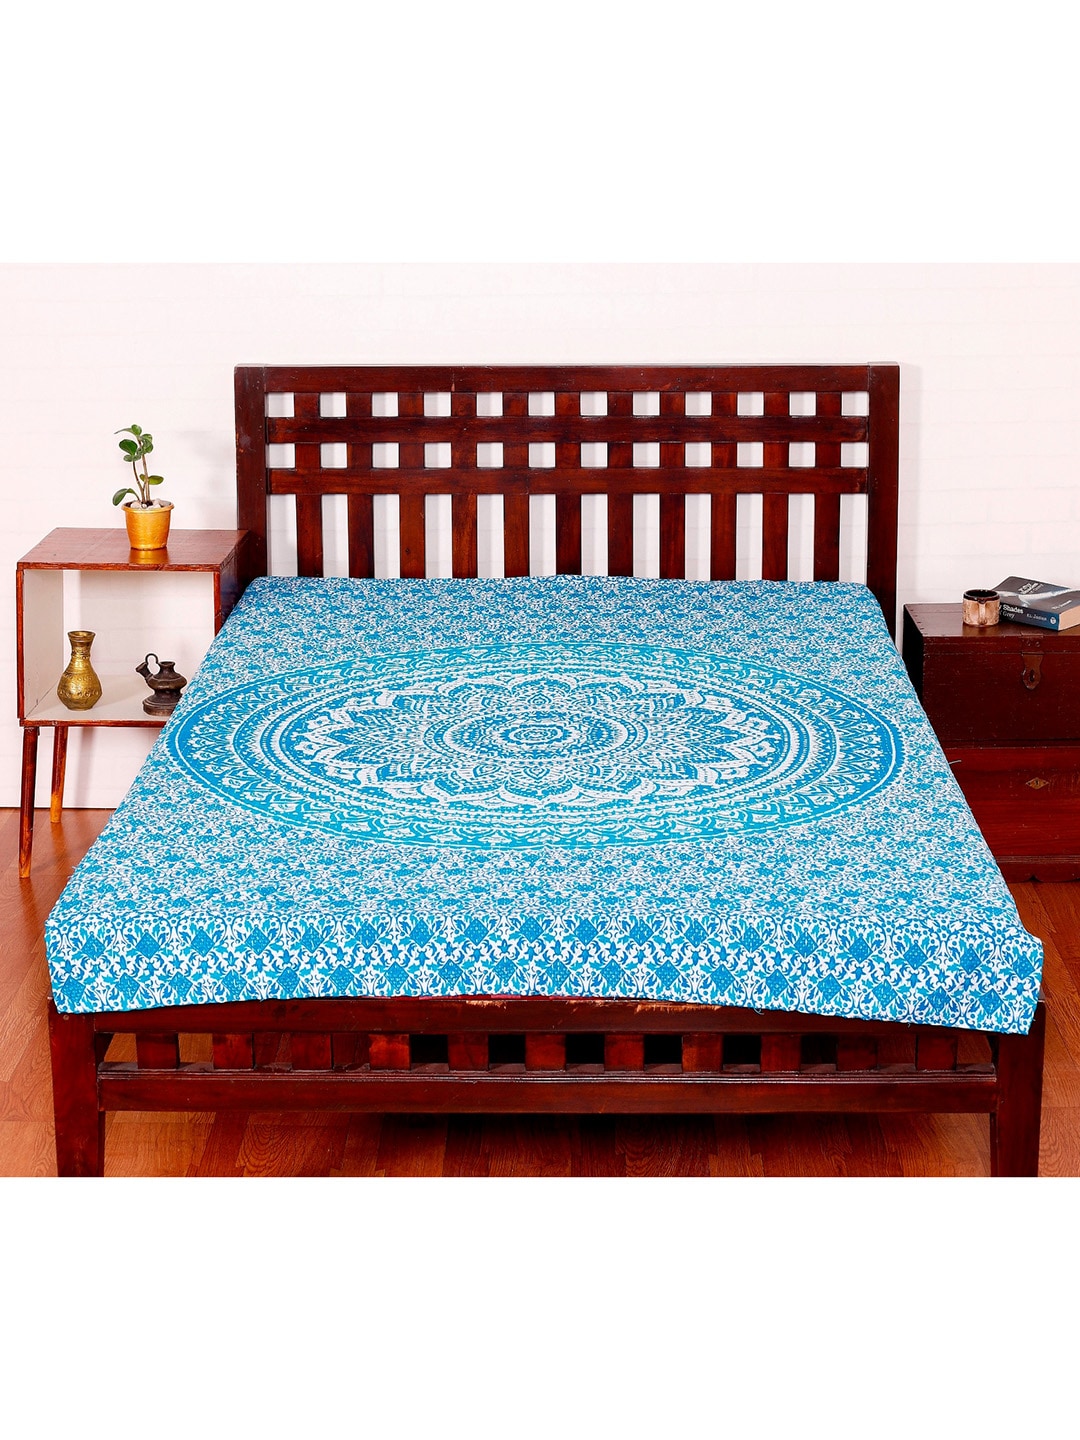 HANDICRAFT PALACE Blue Ombre Mandala Printed Kantha Quilted Cotton Single Bed Cover Price in India